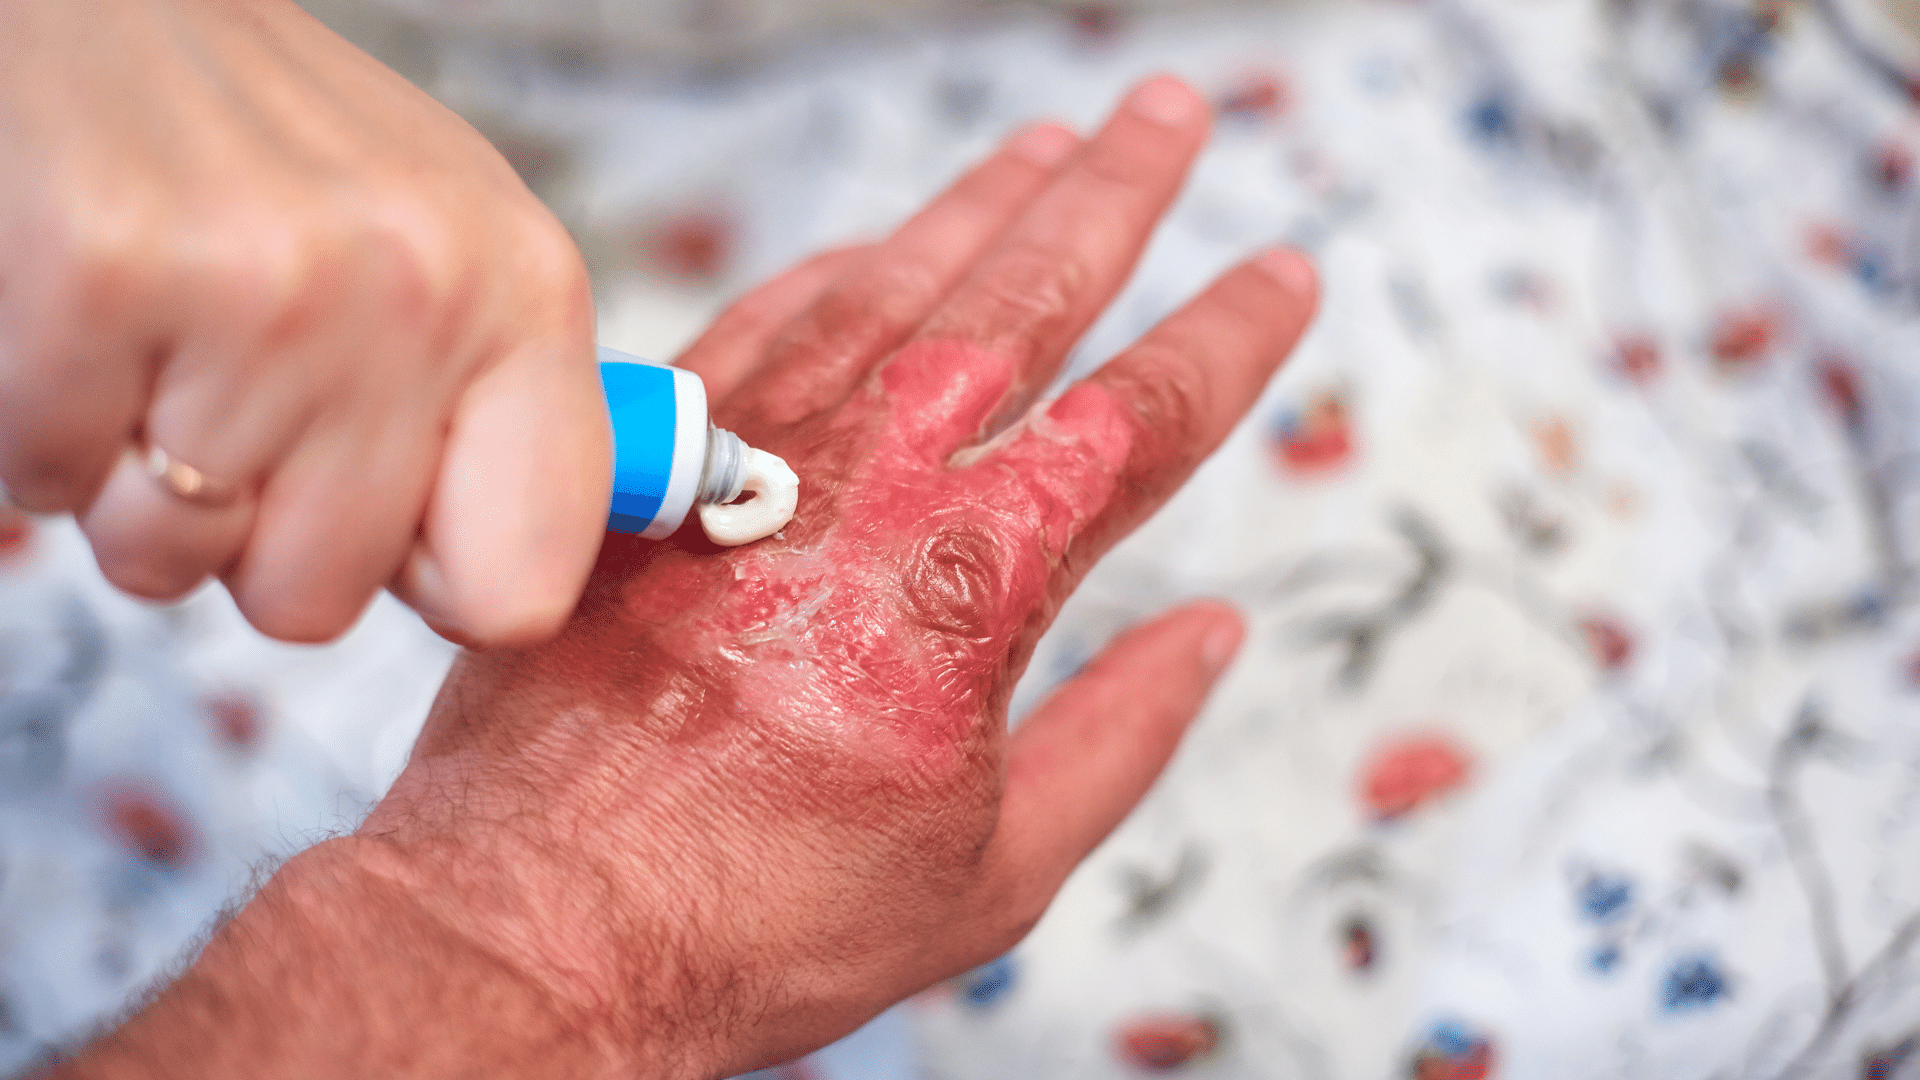 Person applying ointment for a burn on hand.